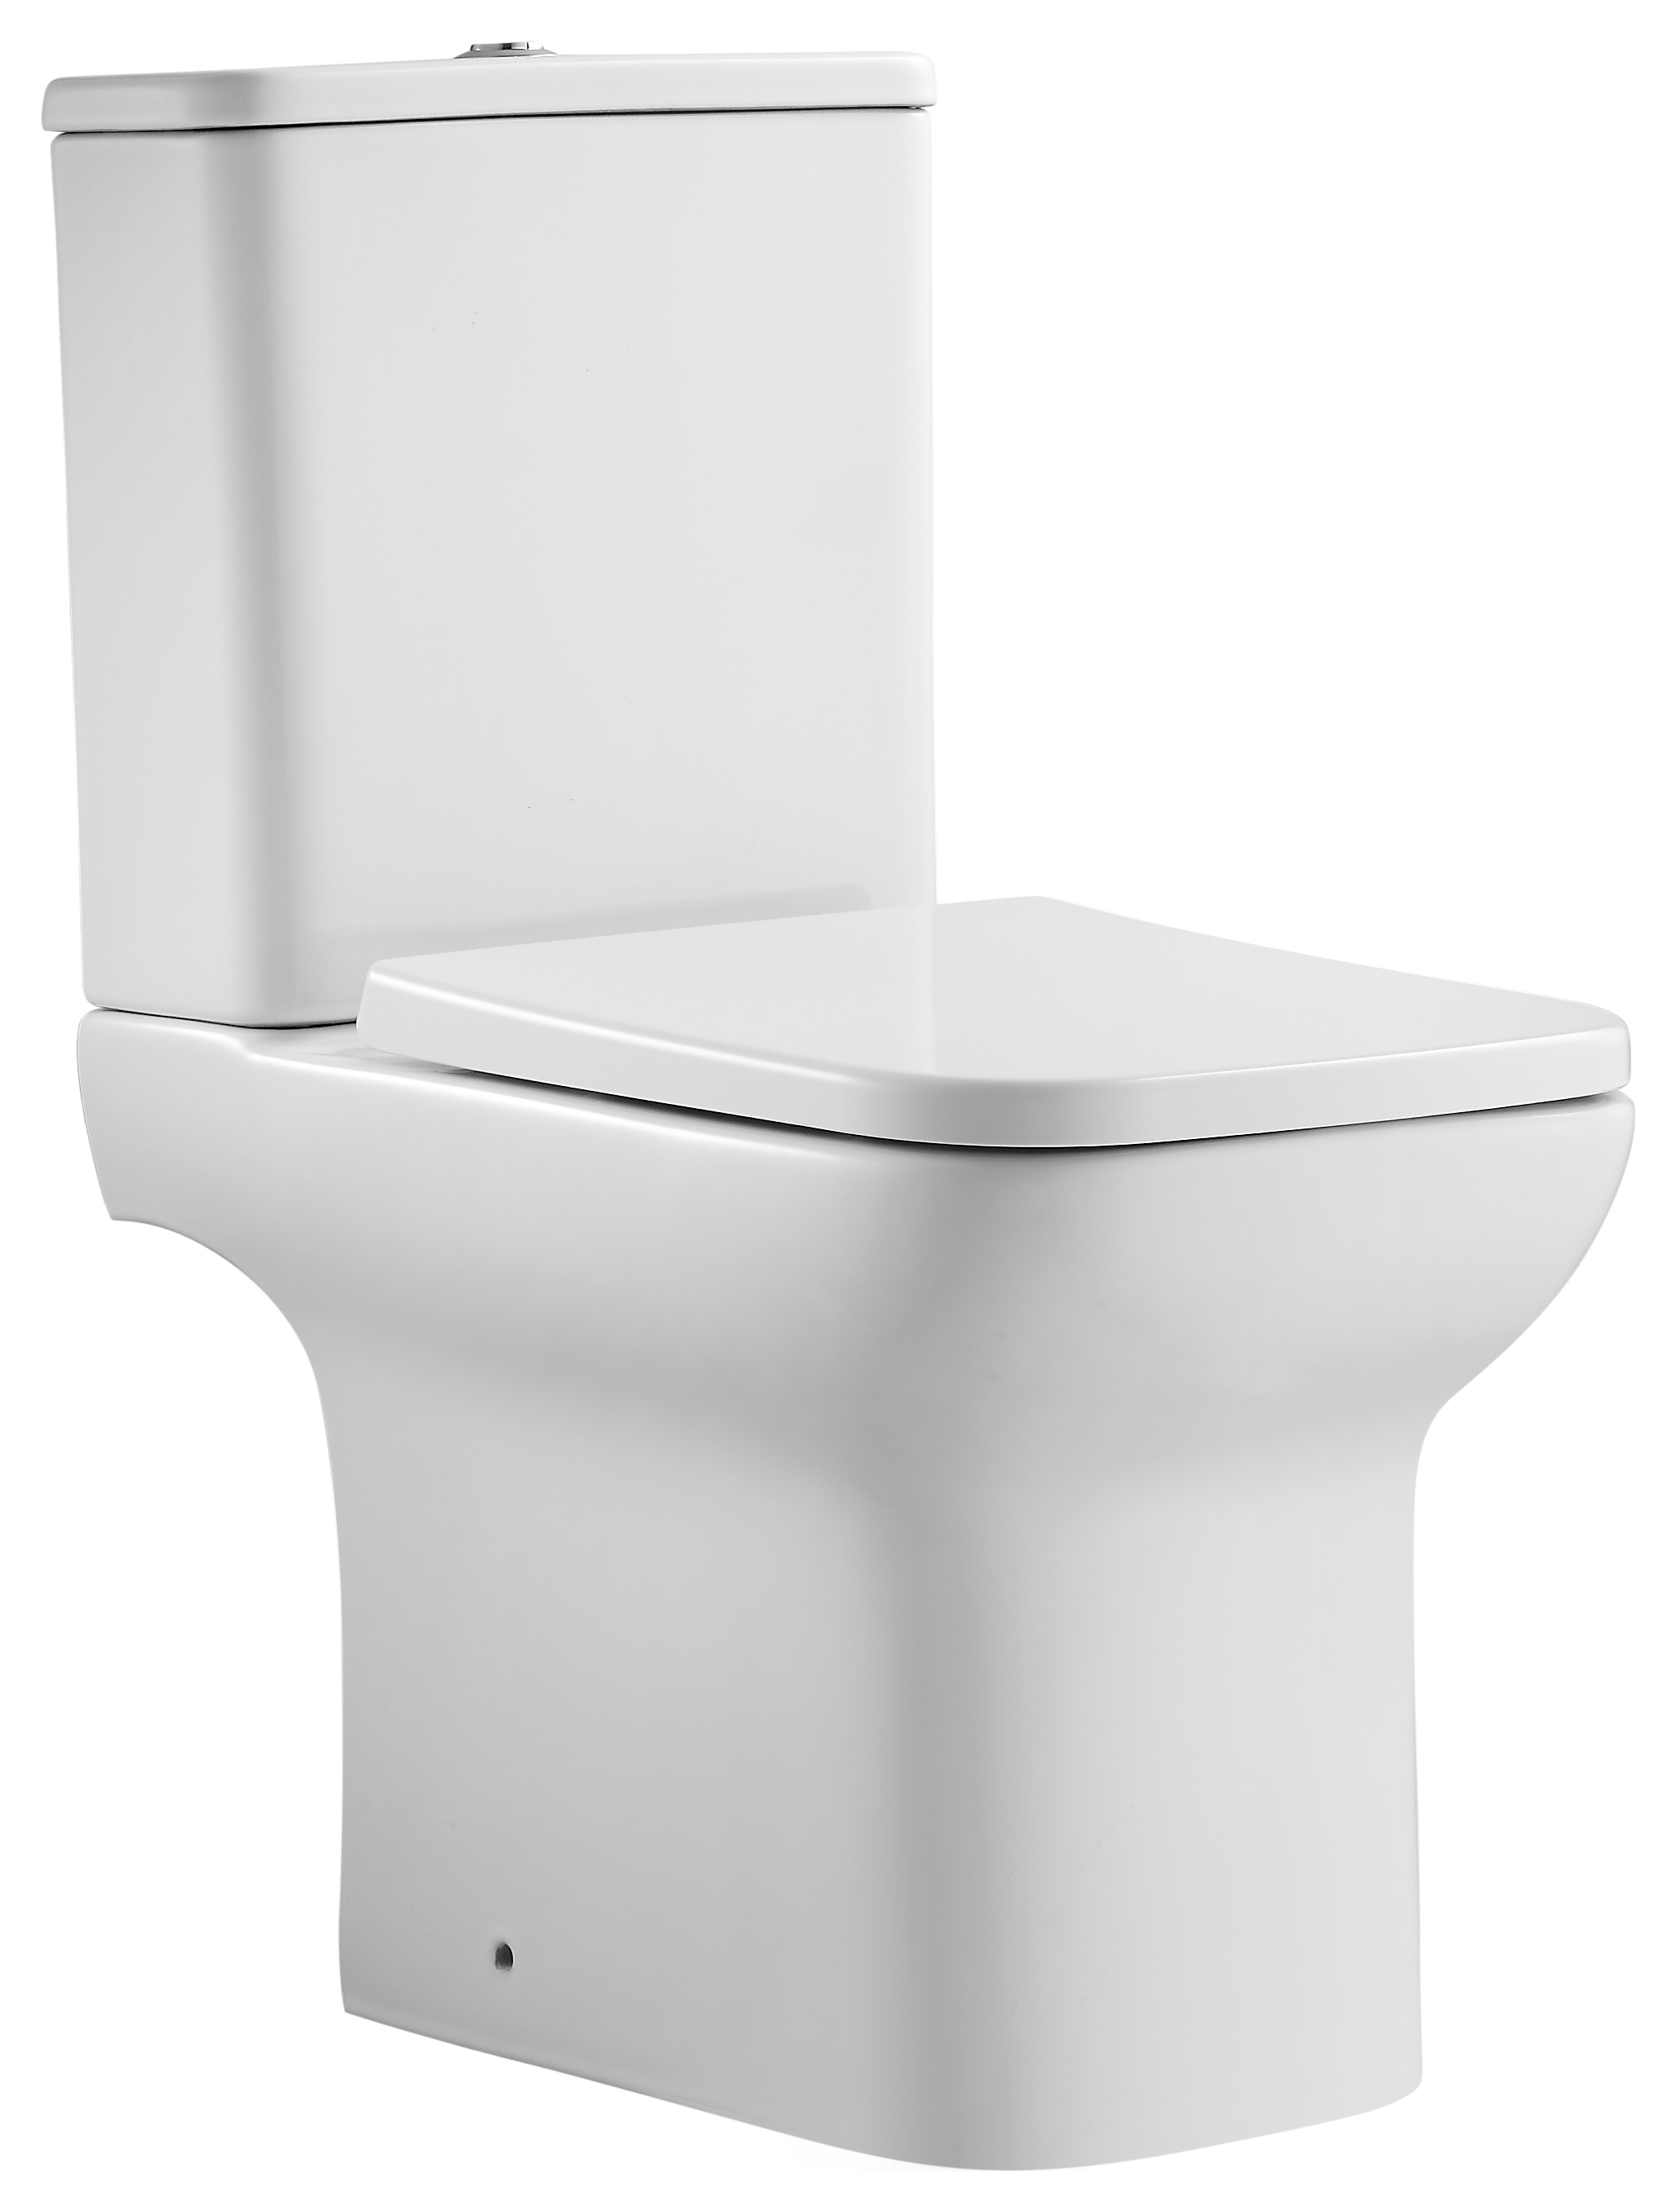 Wickes Cleveland Easy Clean Close Coupled Toilet